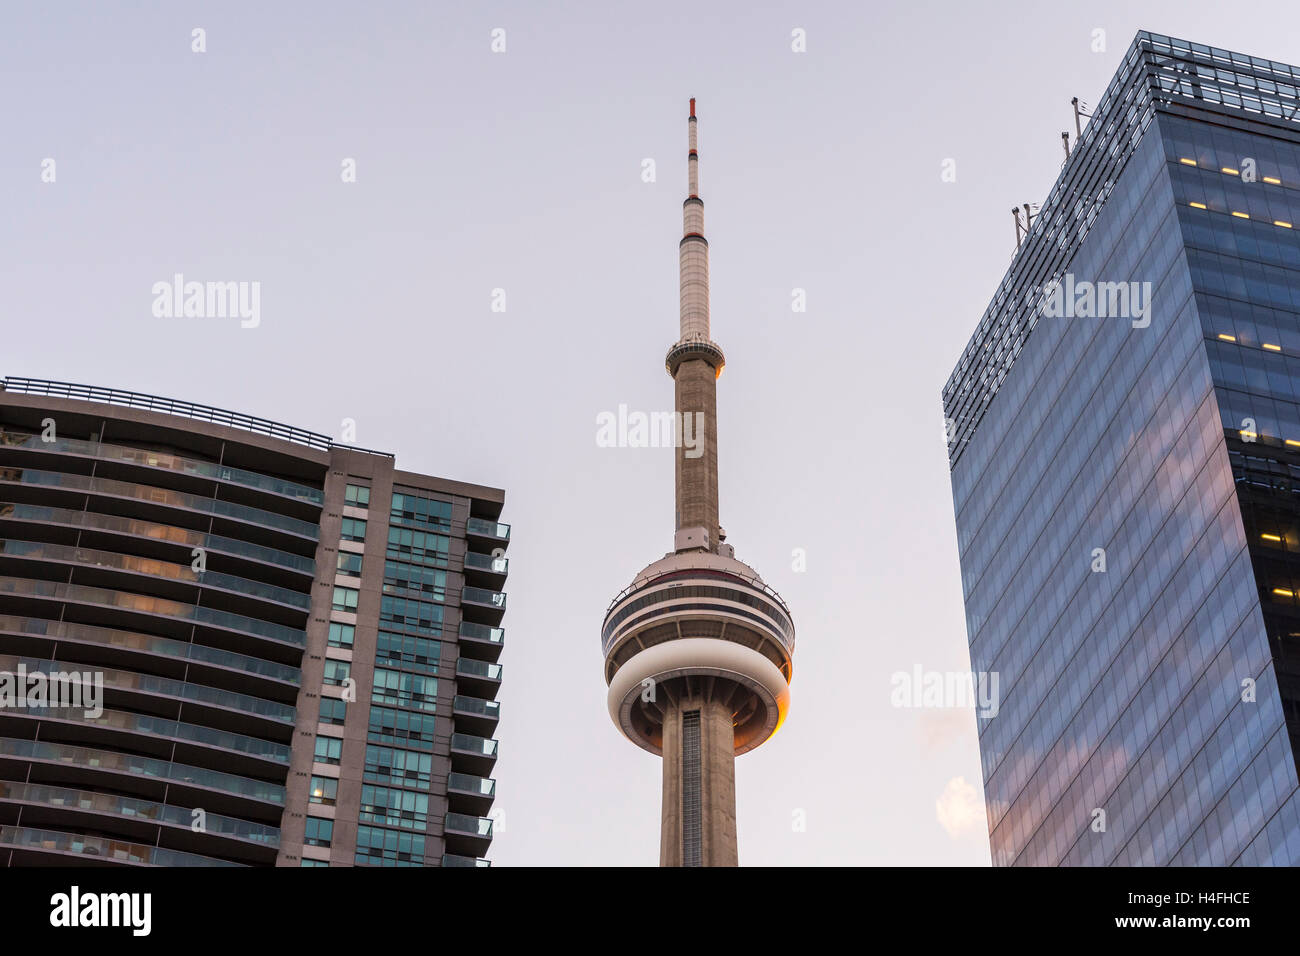 Toronto,Canada-august 2,2015:view of the CN tower in Toronto during a sunset from one of the central street of the city near the Stock Photo